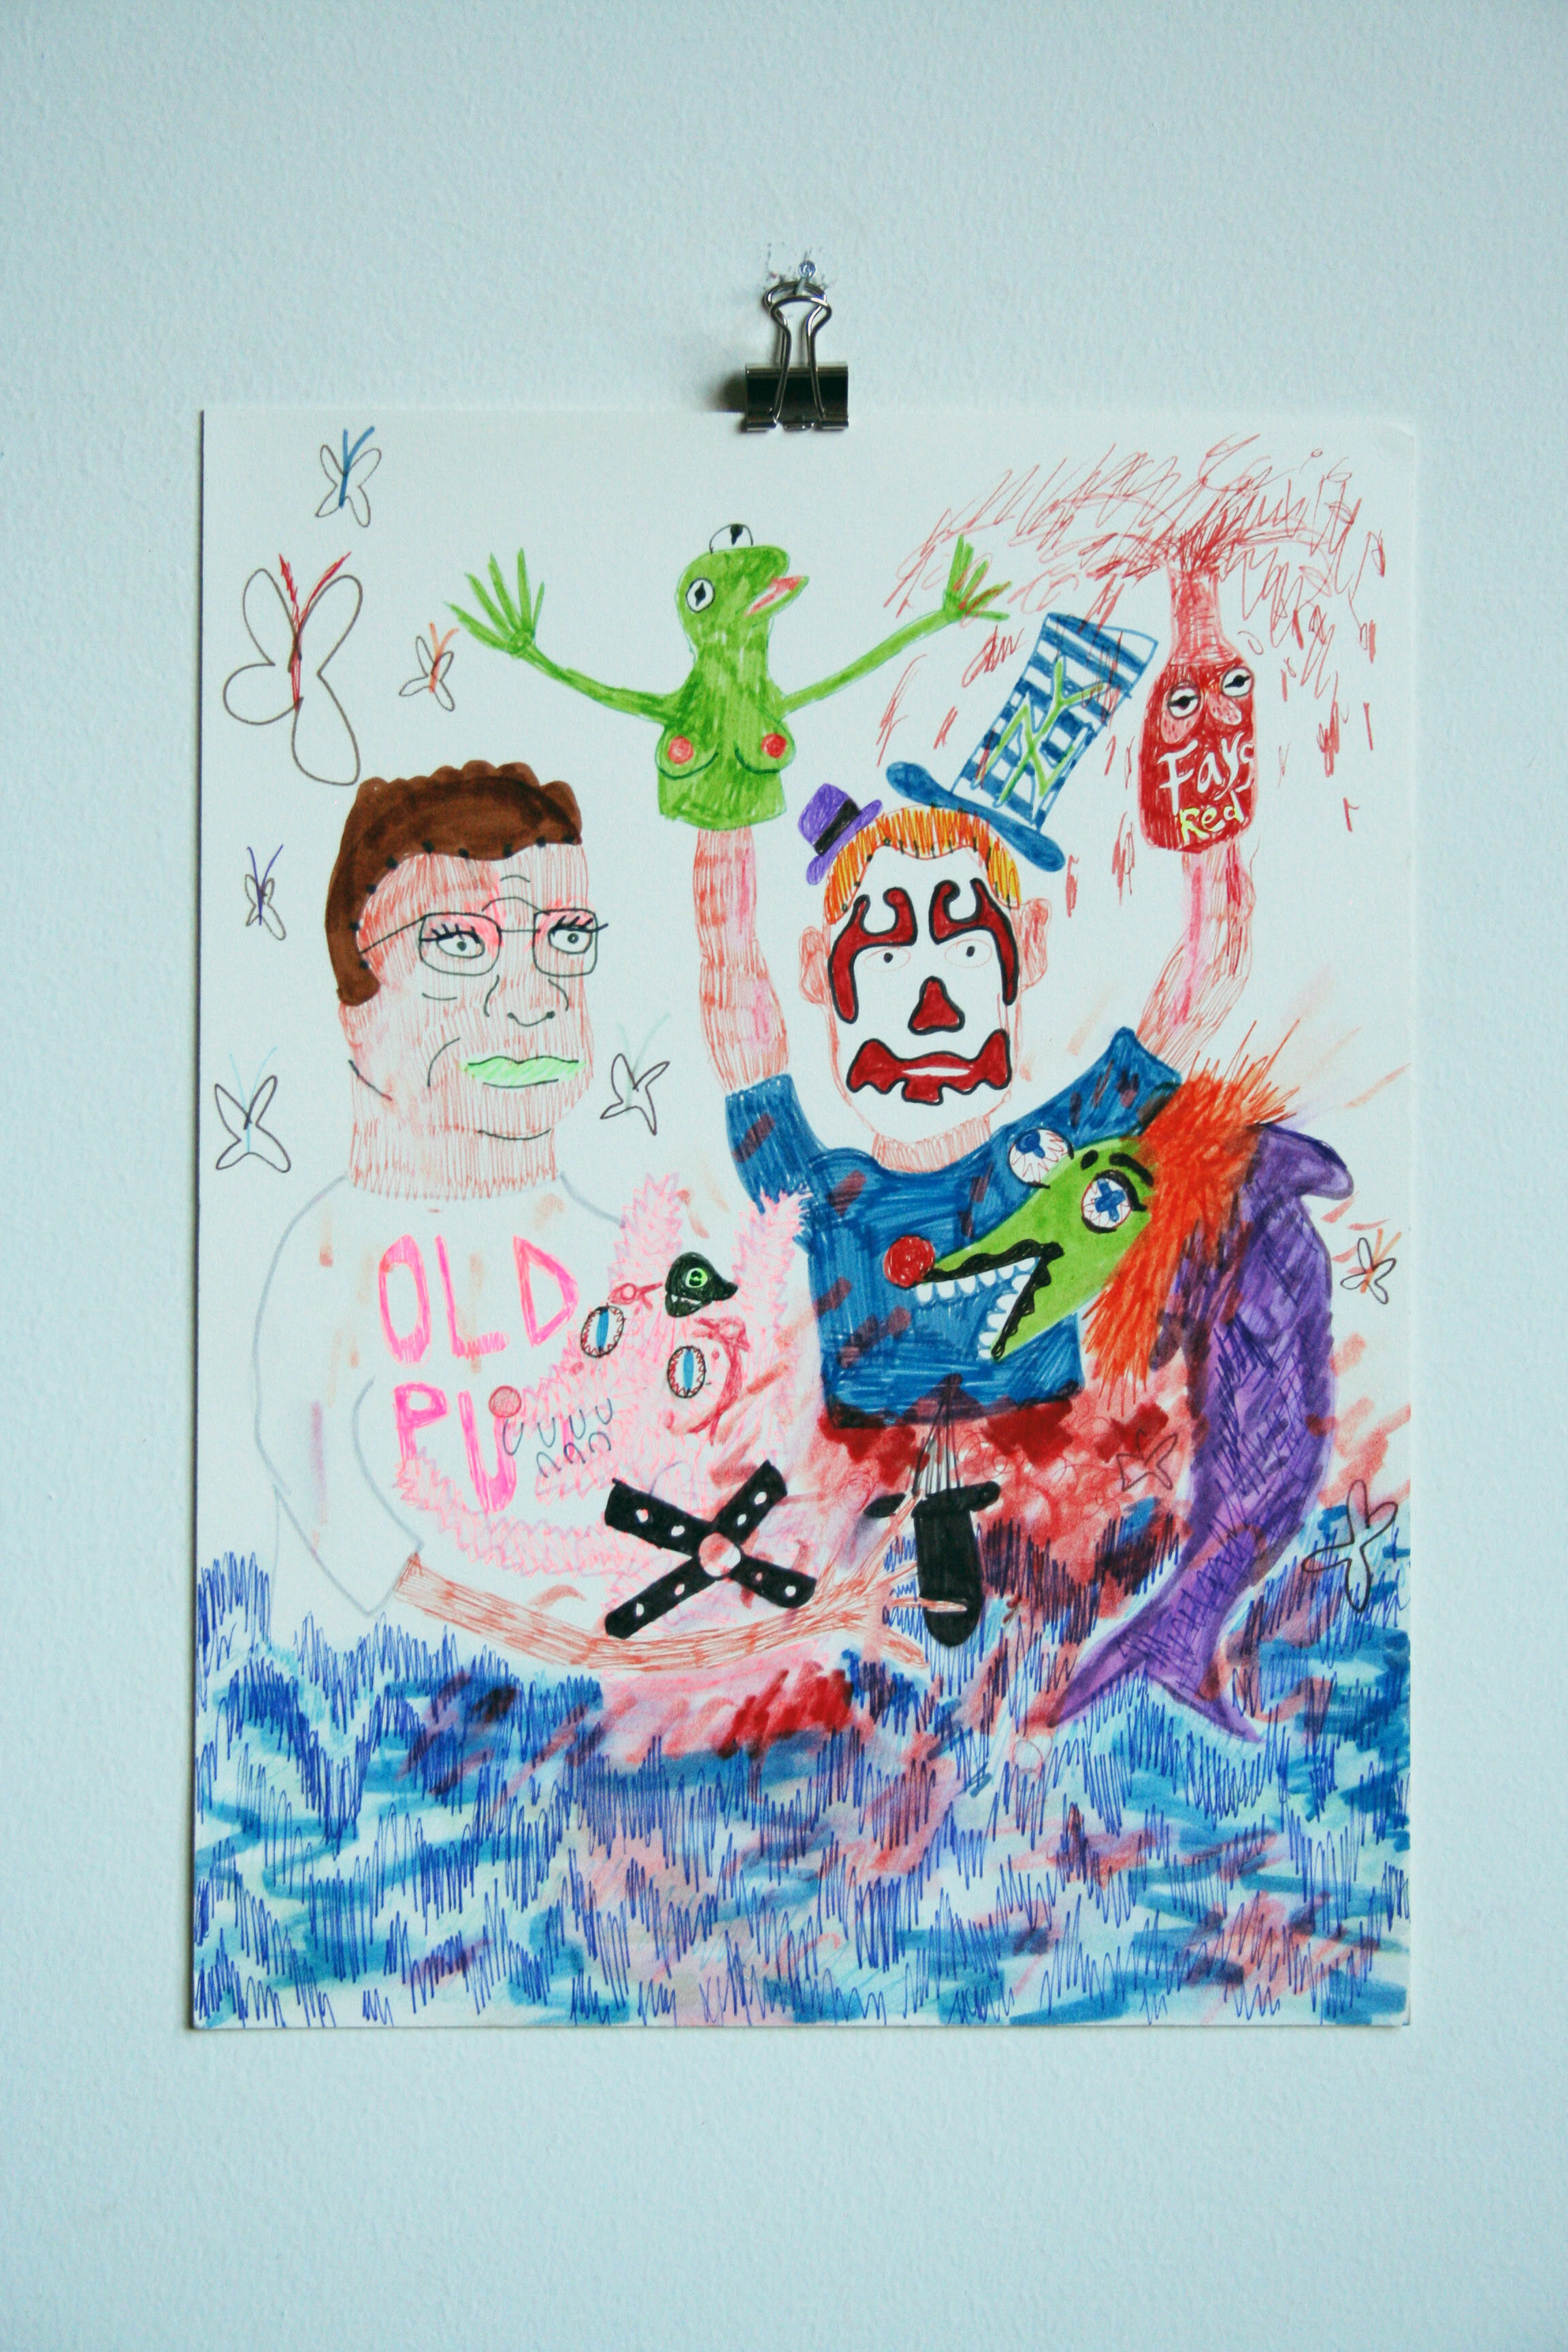   Juggalo Bobby,  2015  12 x 9 inches (30.48 x 22.86 cm.)  Marker on paper 